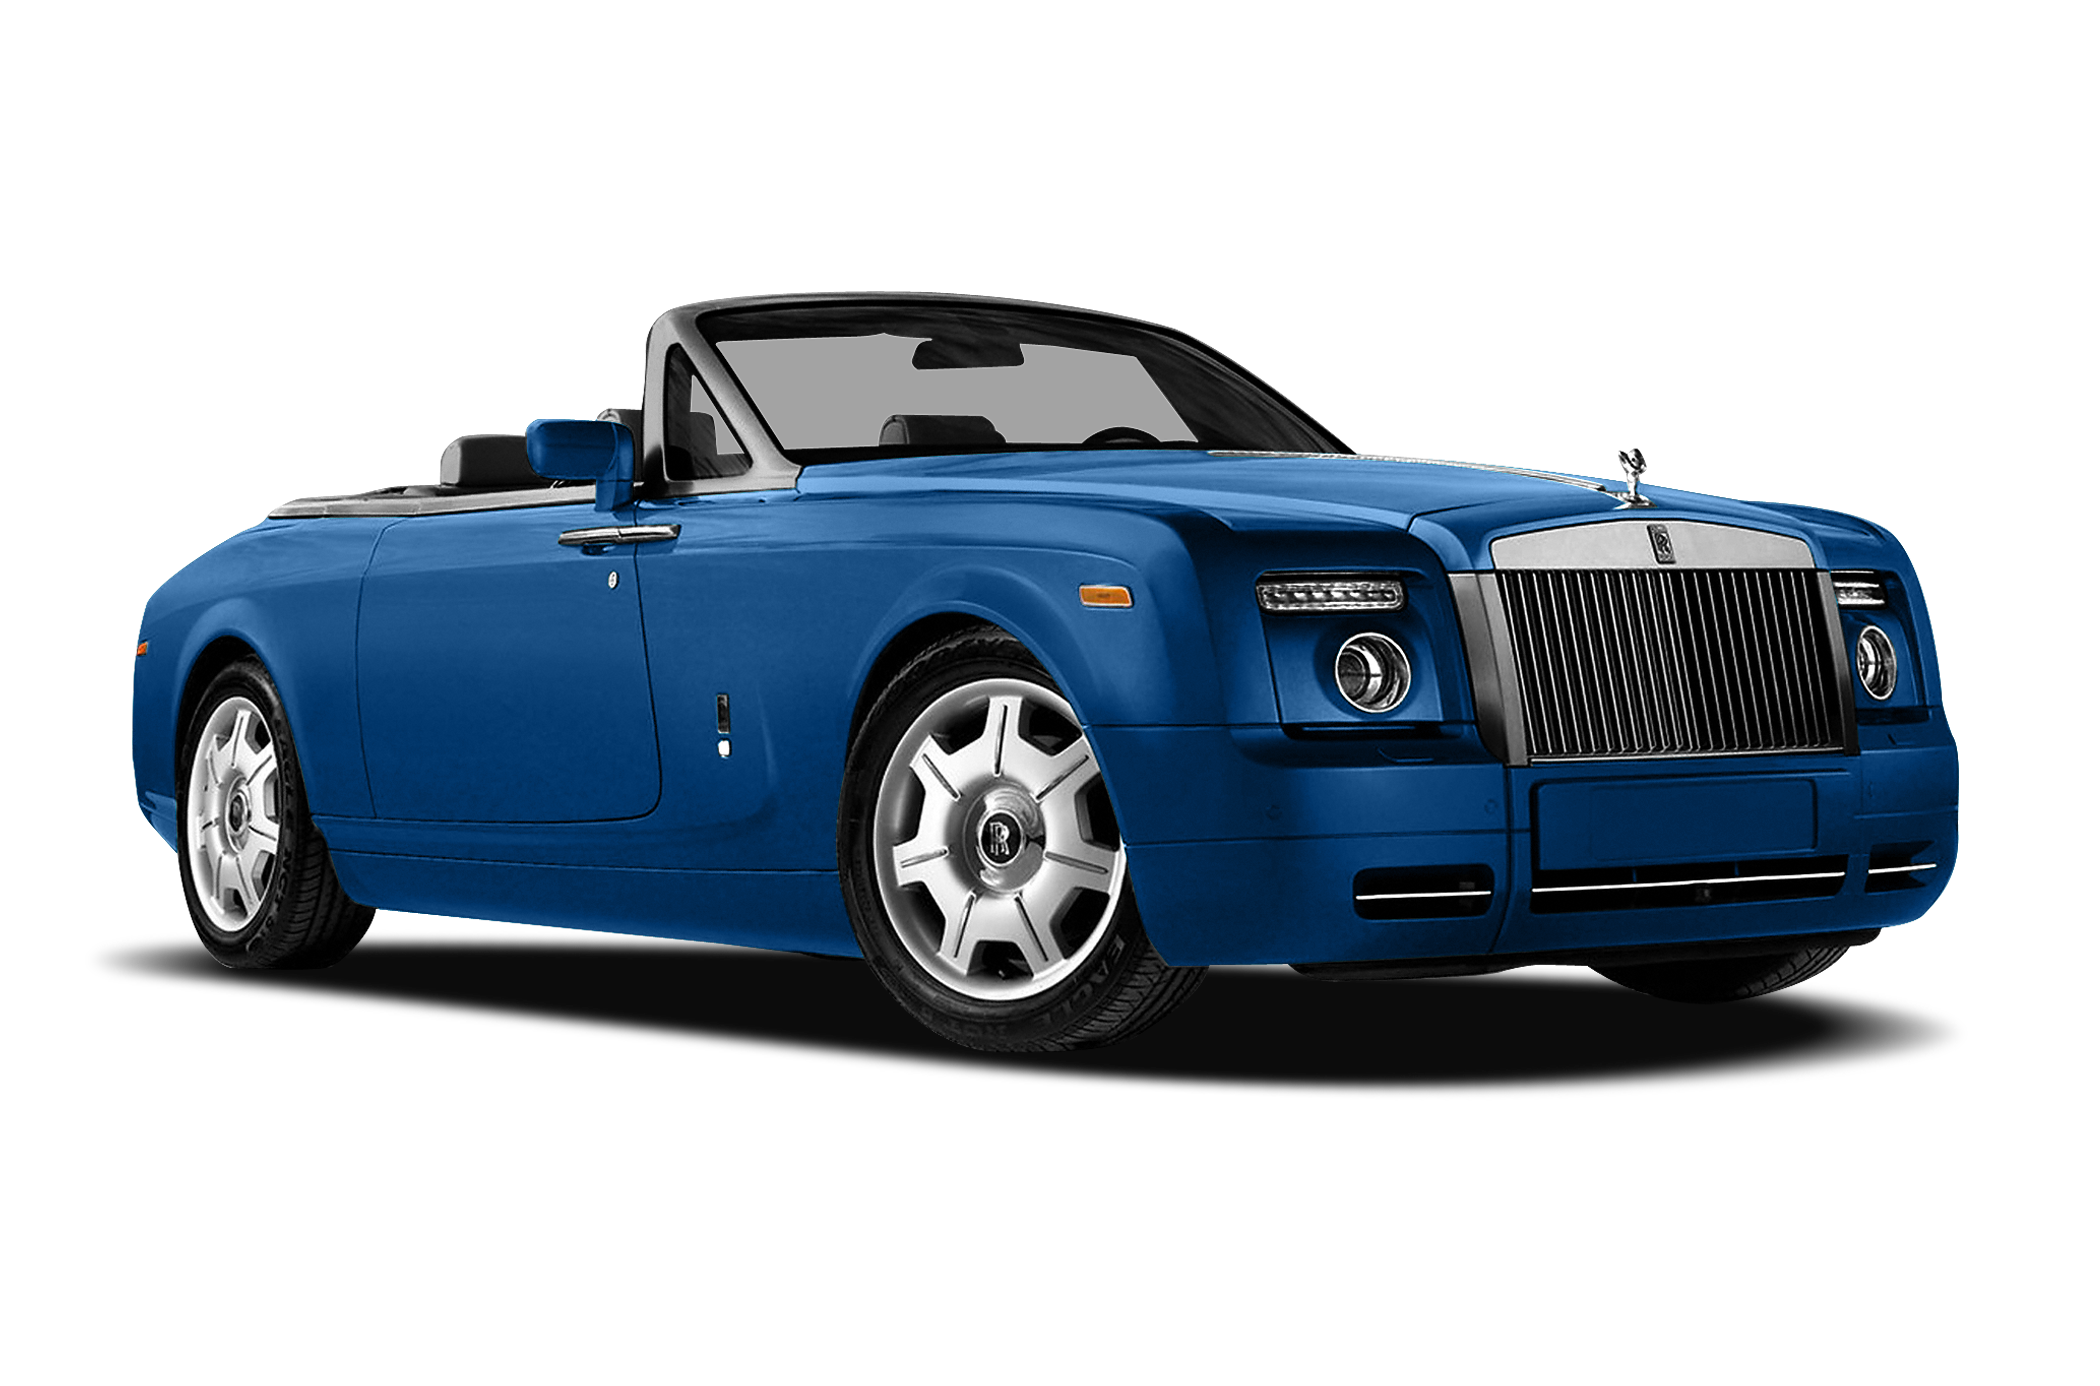 Side view of the 2010 Rolls-Royce Phantom Drophead Coupe